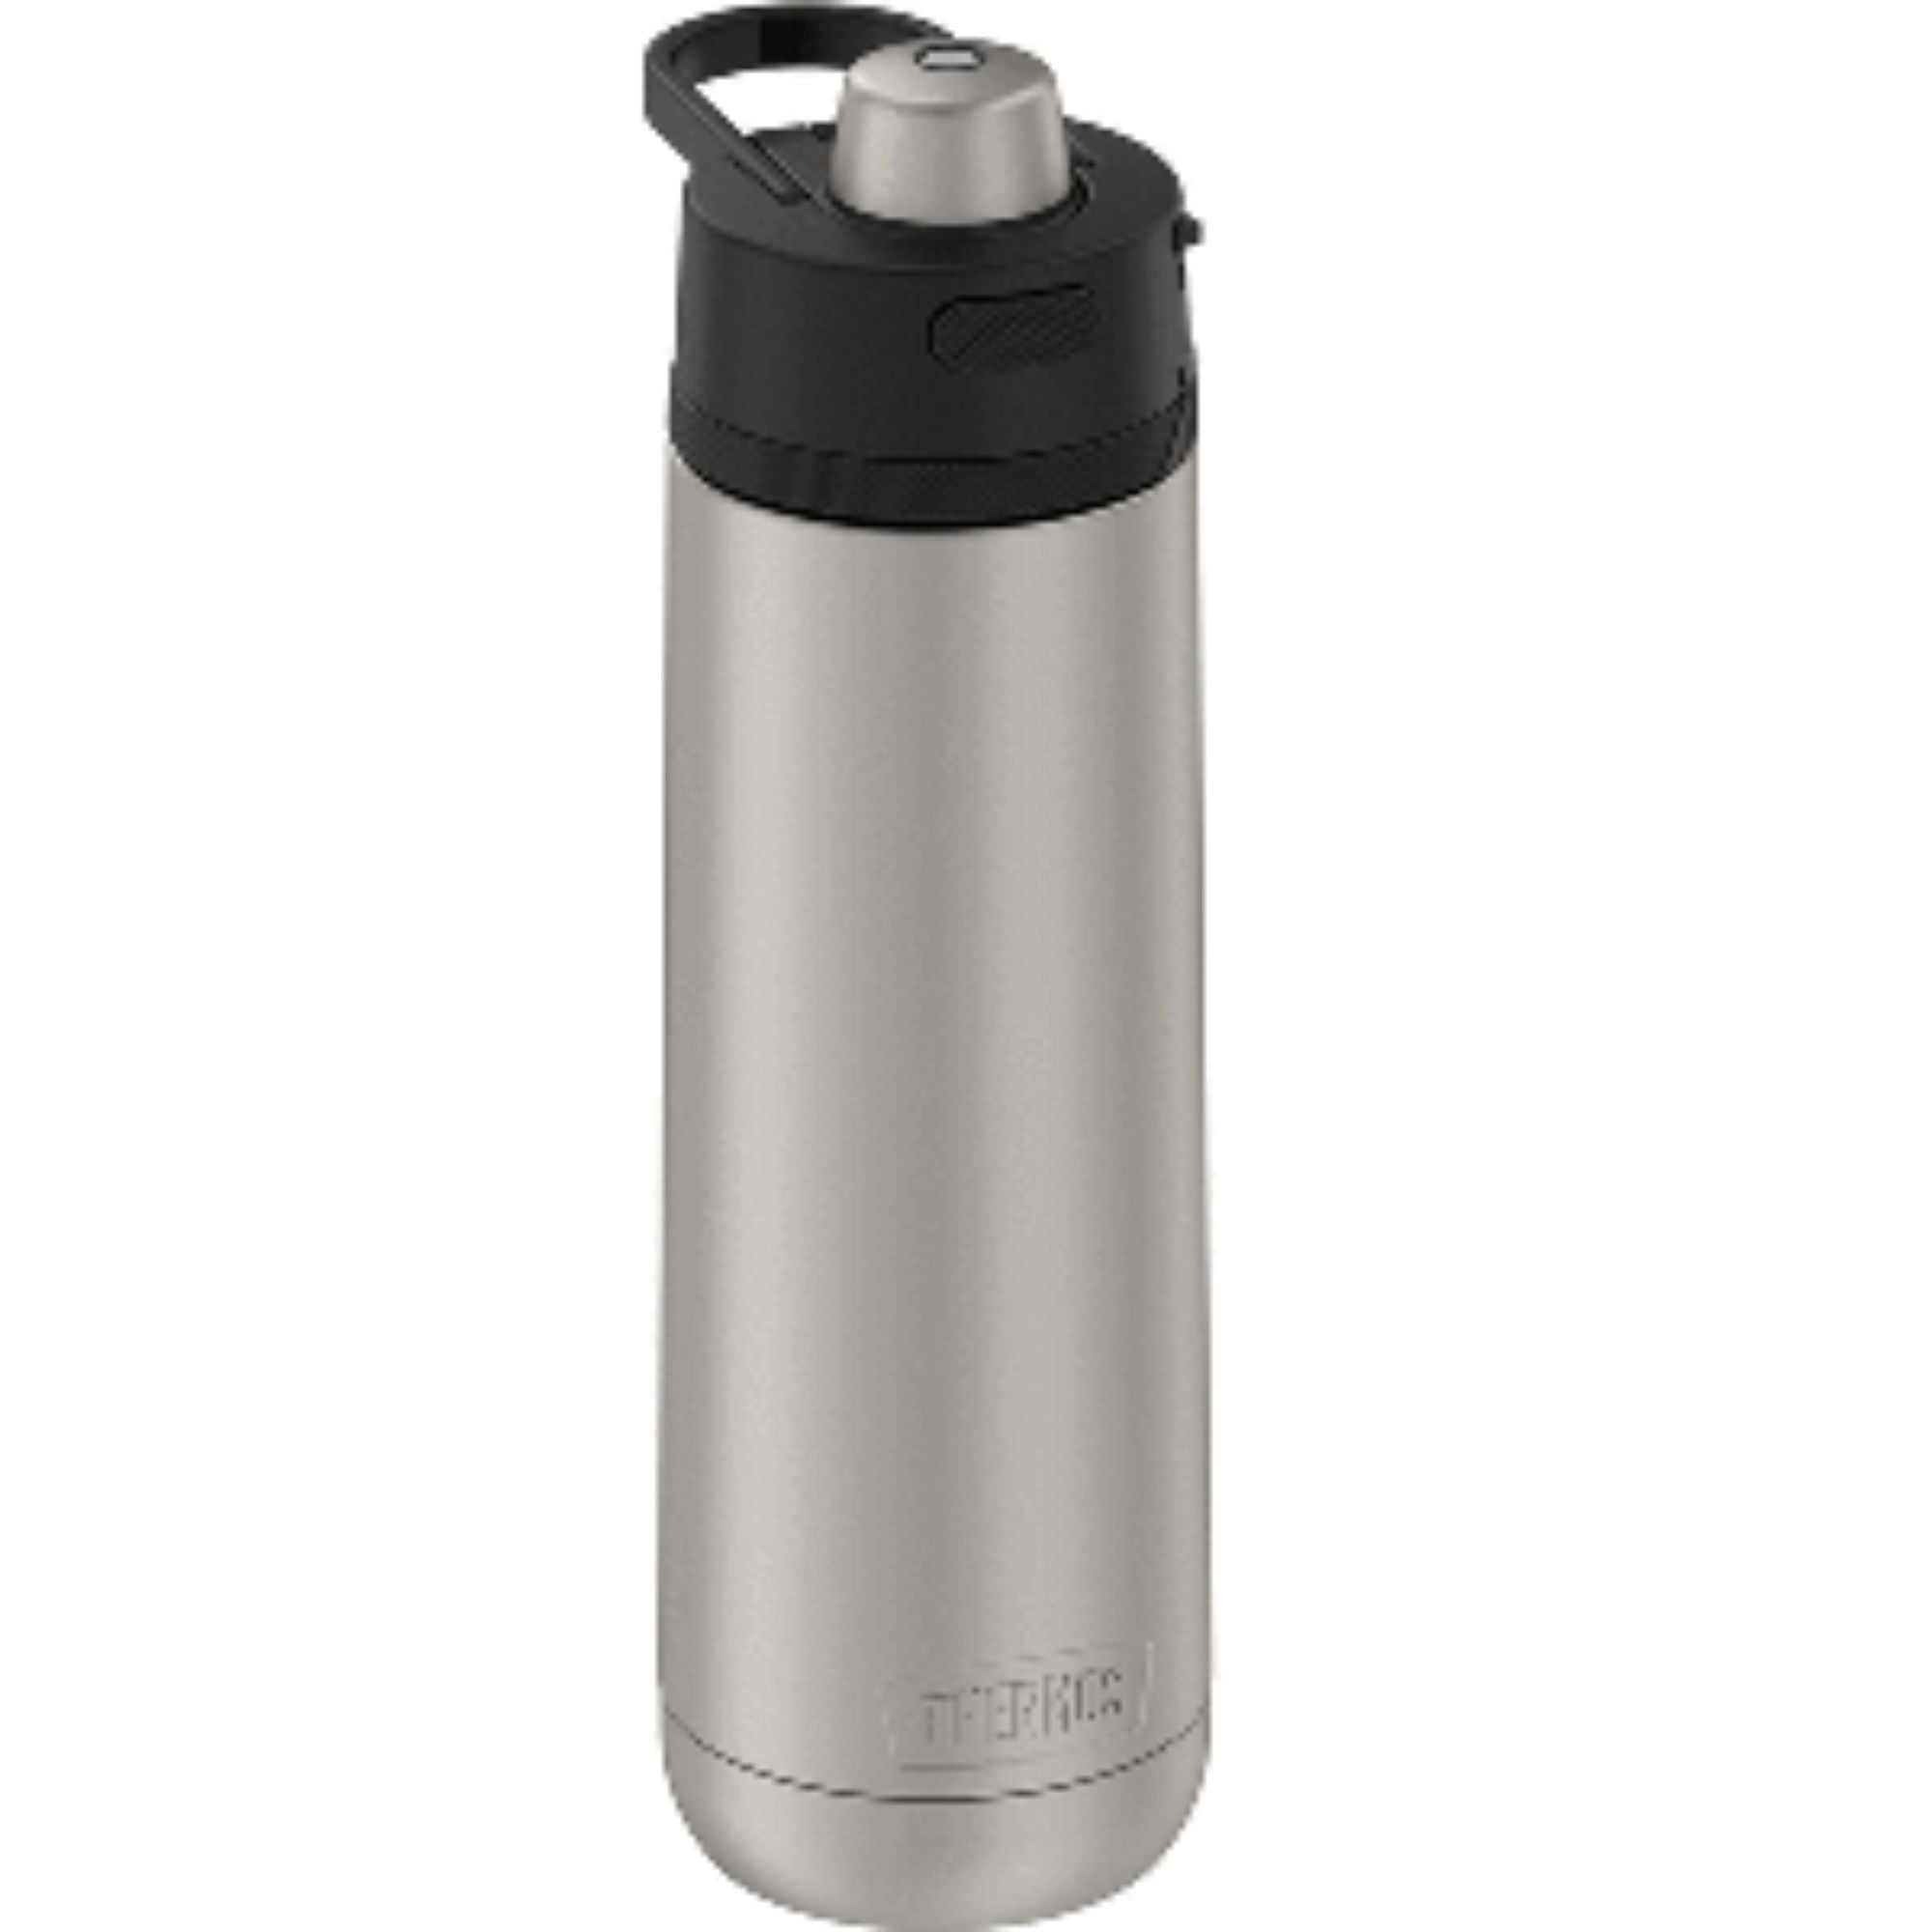 Genuine Thermos ThermoCafe 0.5L Litre Stainless Steel Flask Hot or Cold 